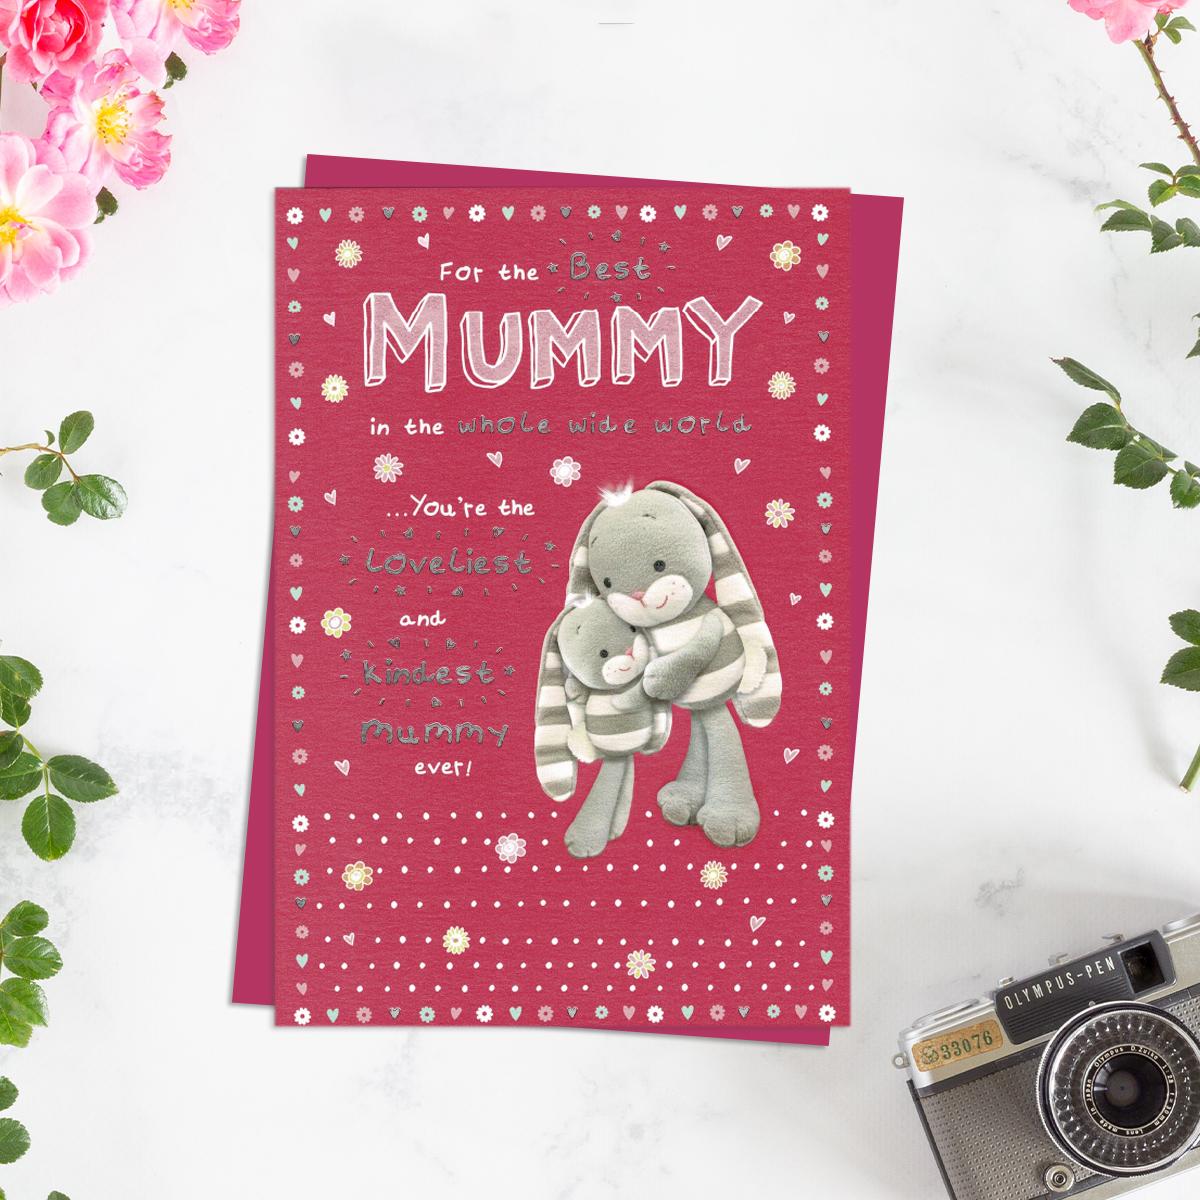 ' For The Best Mummy' Mother's Day Card Featuring Hun Bun! Complete With Cerise Envelope